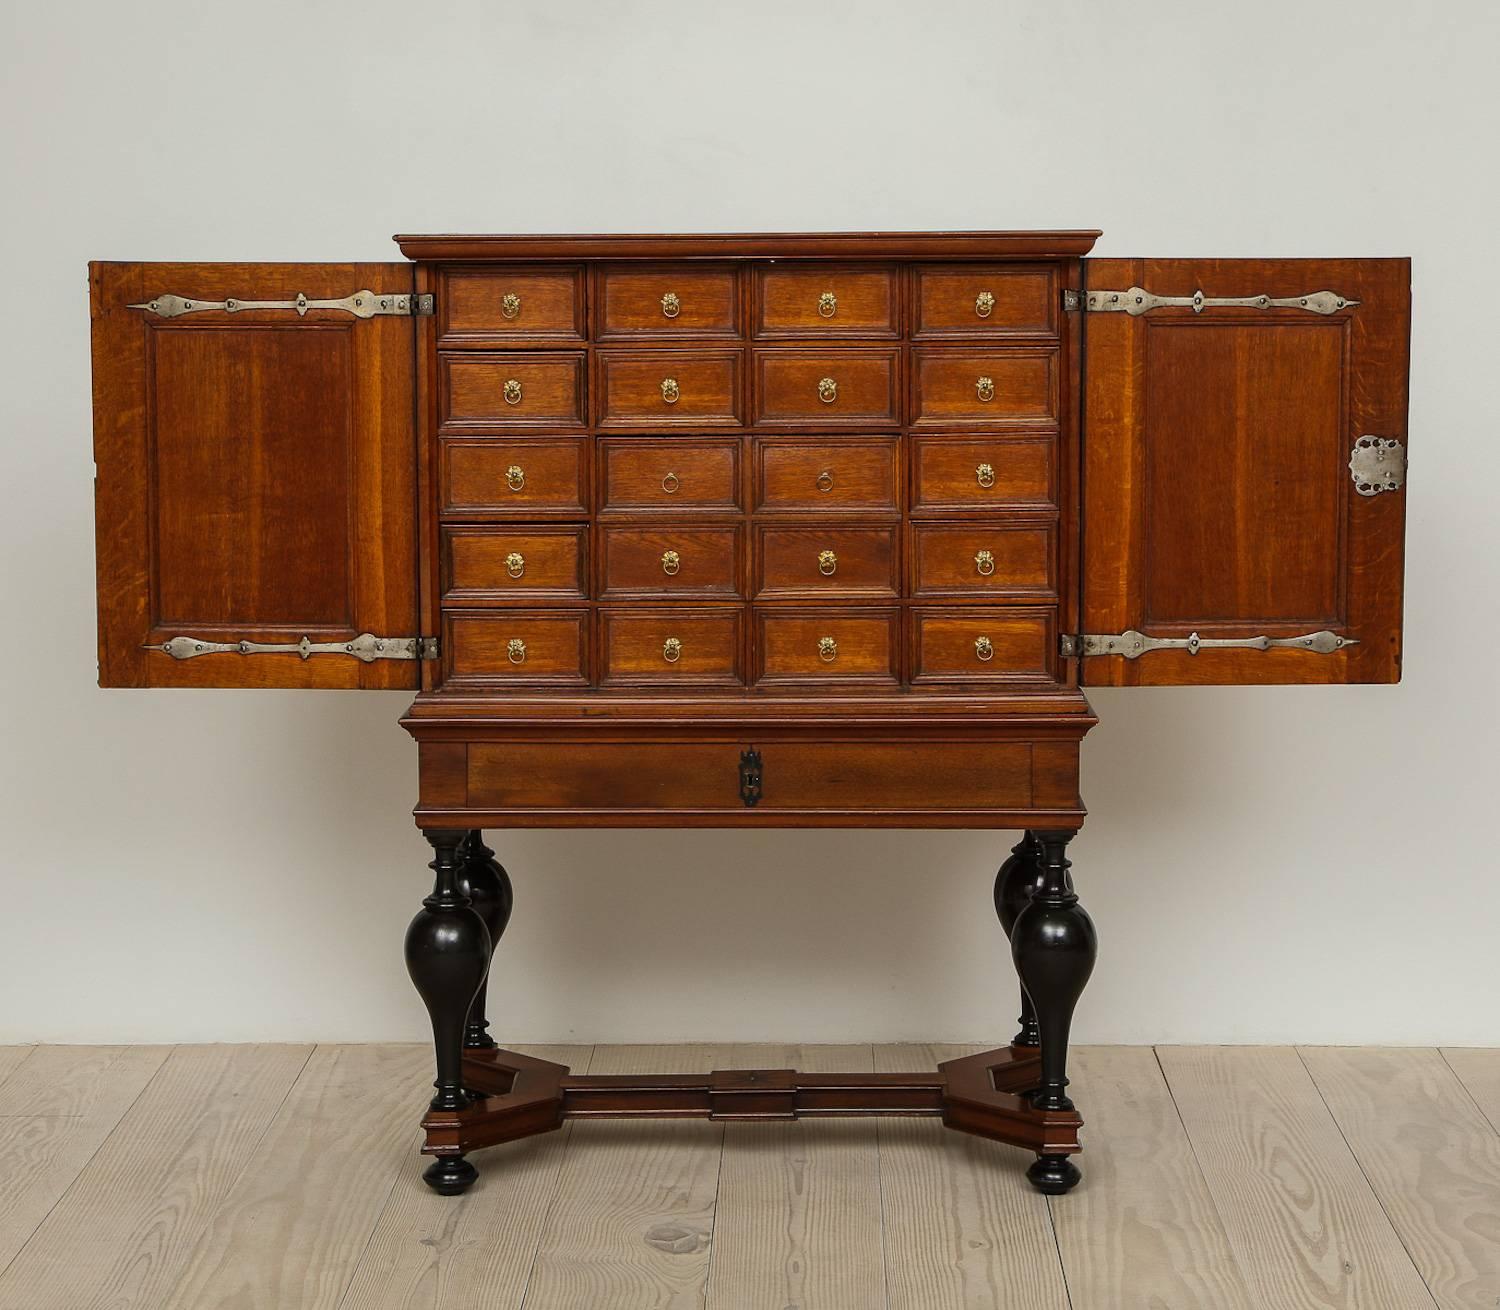 A fine Baroque Scandinavian cabinet on stand, circa 1740-1770, origin: Stockholm, Sweden, interior fitted with smaller spice drawers with bottom drawer, mahogany veneer with ebonized feet, pewter and brass hardware.